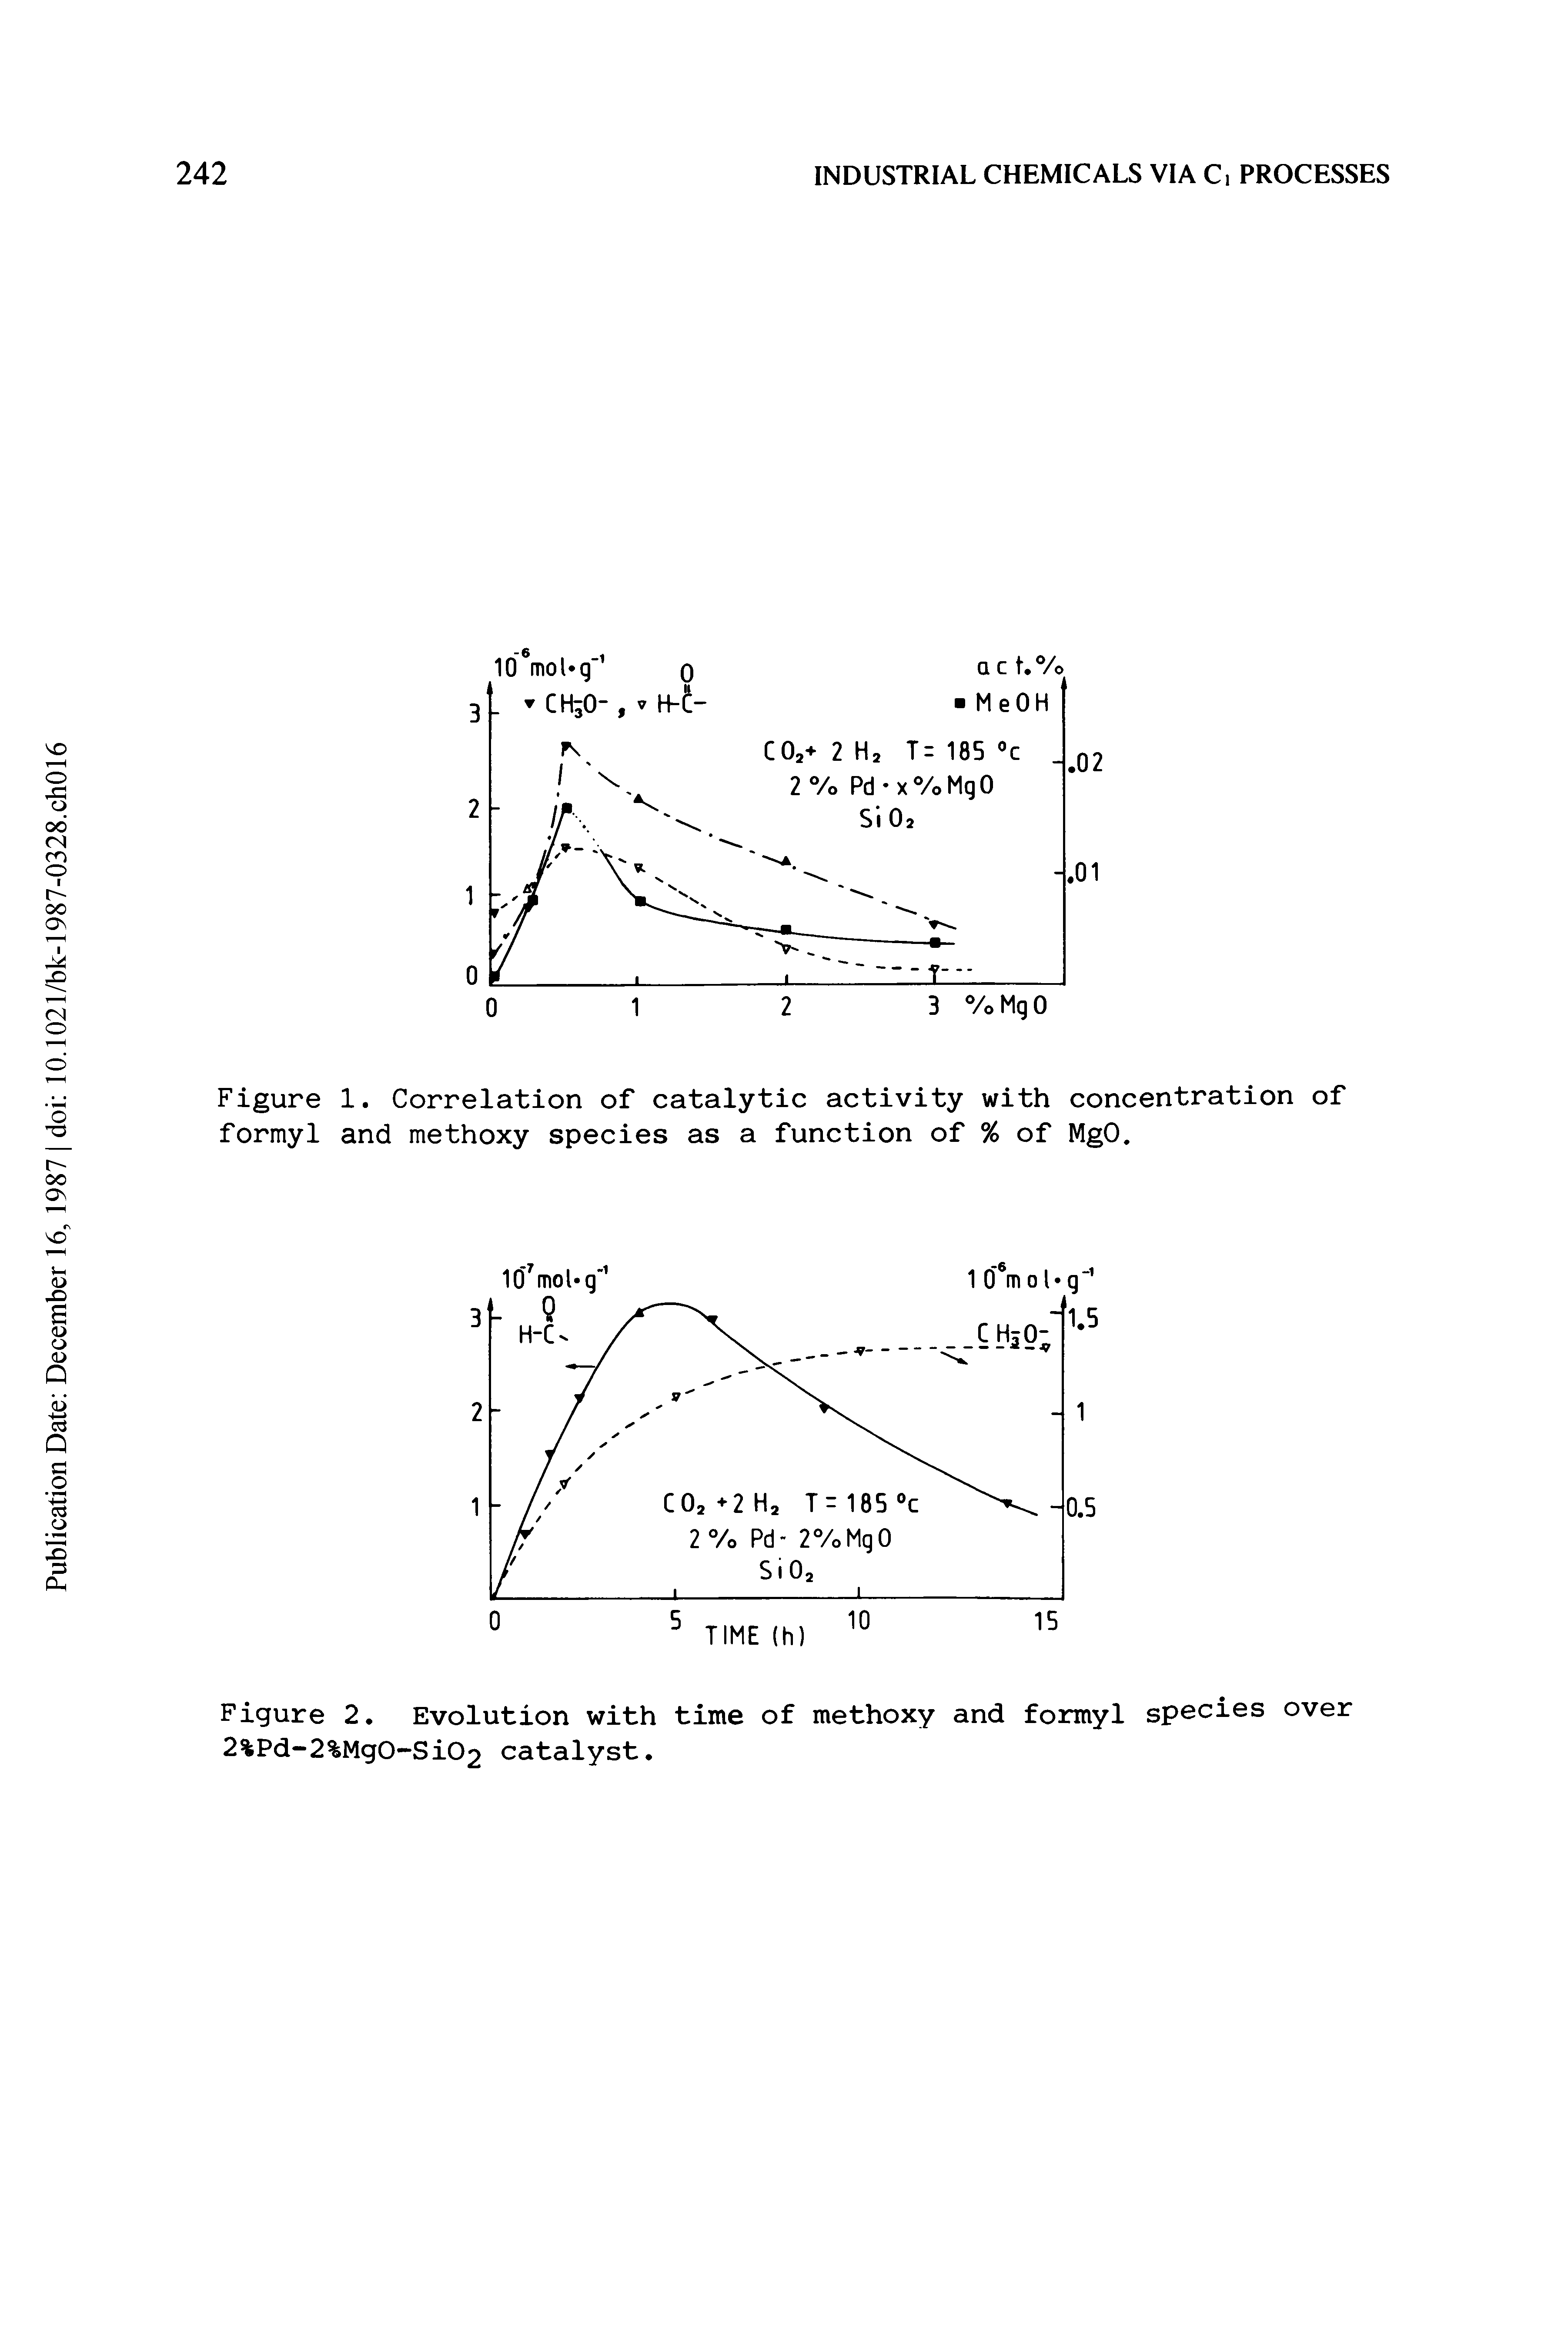 Figure 1. Correlation of catalytic activity with concentration of formyl and methoxy species as a function of % of MgO.